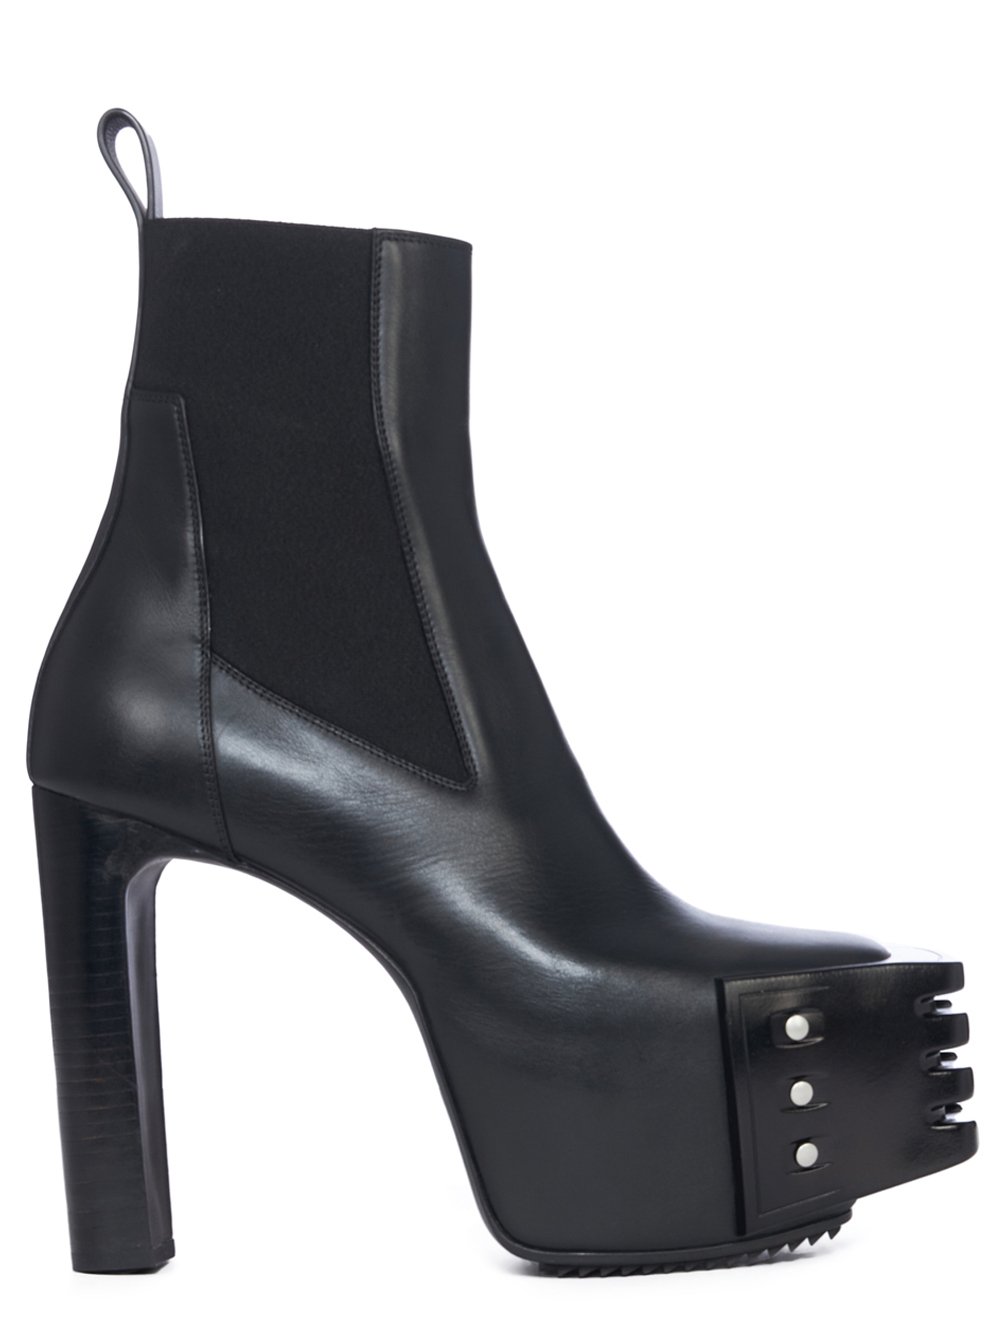 RICK OWENS FW23 LUXOR GRILLED PLATFORMS 65 IN BLACK CORTINA GREASE CALF LEATHER